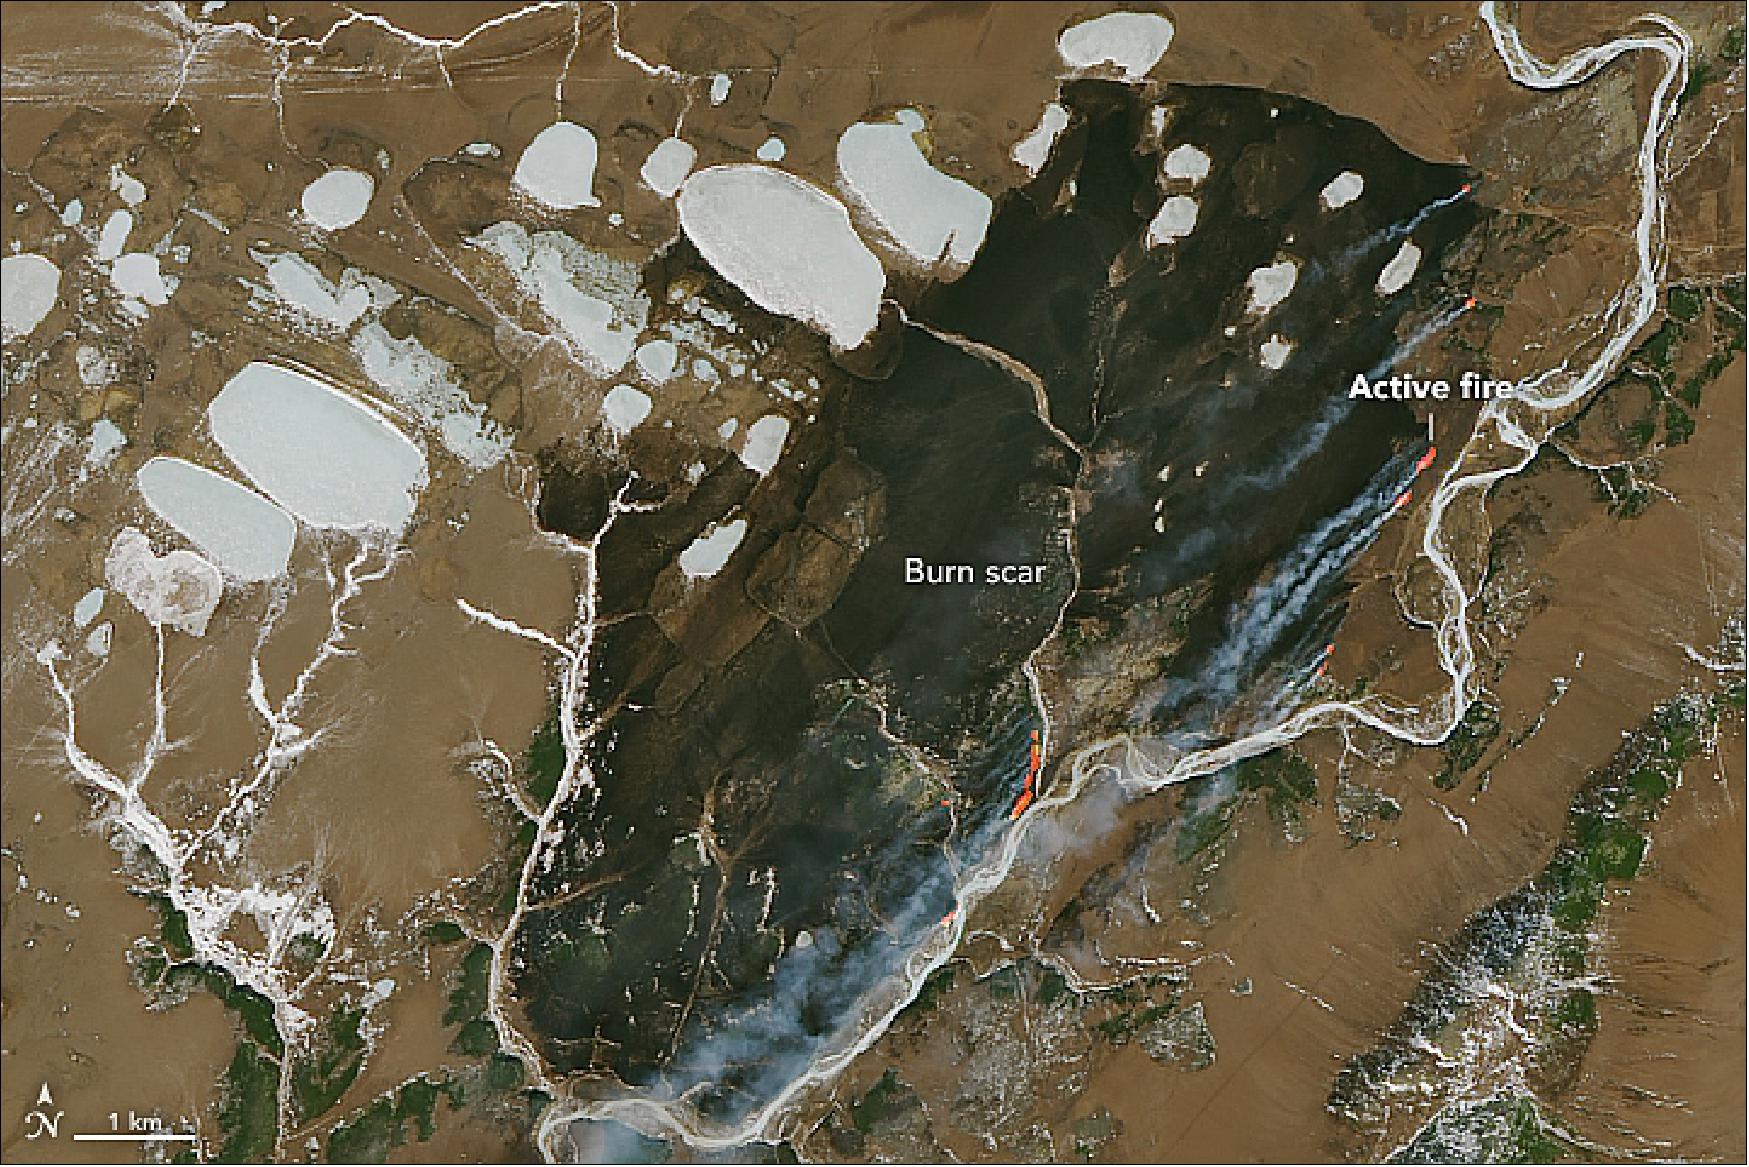 Figure 87: This image and the image of Figure 88 show the fire east of the town of Evensk, as observed by OLI (Operational Land Imager) on Landsat-8 of NASA. The satellite imagery indicates that the fire has been burning since at least April 6. According to Russia’s Federal Forestry Agency, one fire of nearly 4,000 hectares (10,000 acres) was reported on 8 April on forest lands in the Magadan Oblast region (image credit: NASA Earth Observatory, image by Joshua Stevens, using Landsat data from the U.S. Geological Survey. Text by Kasha Patel)